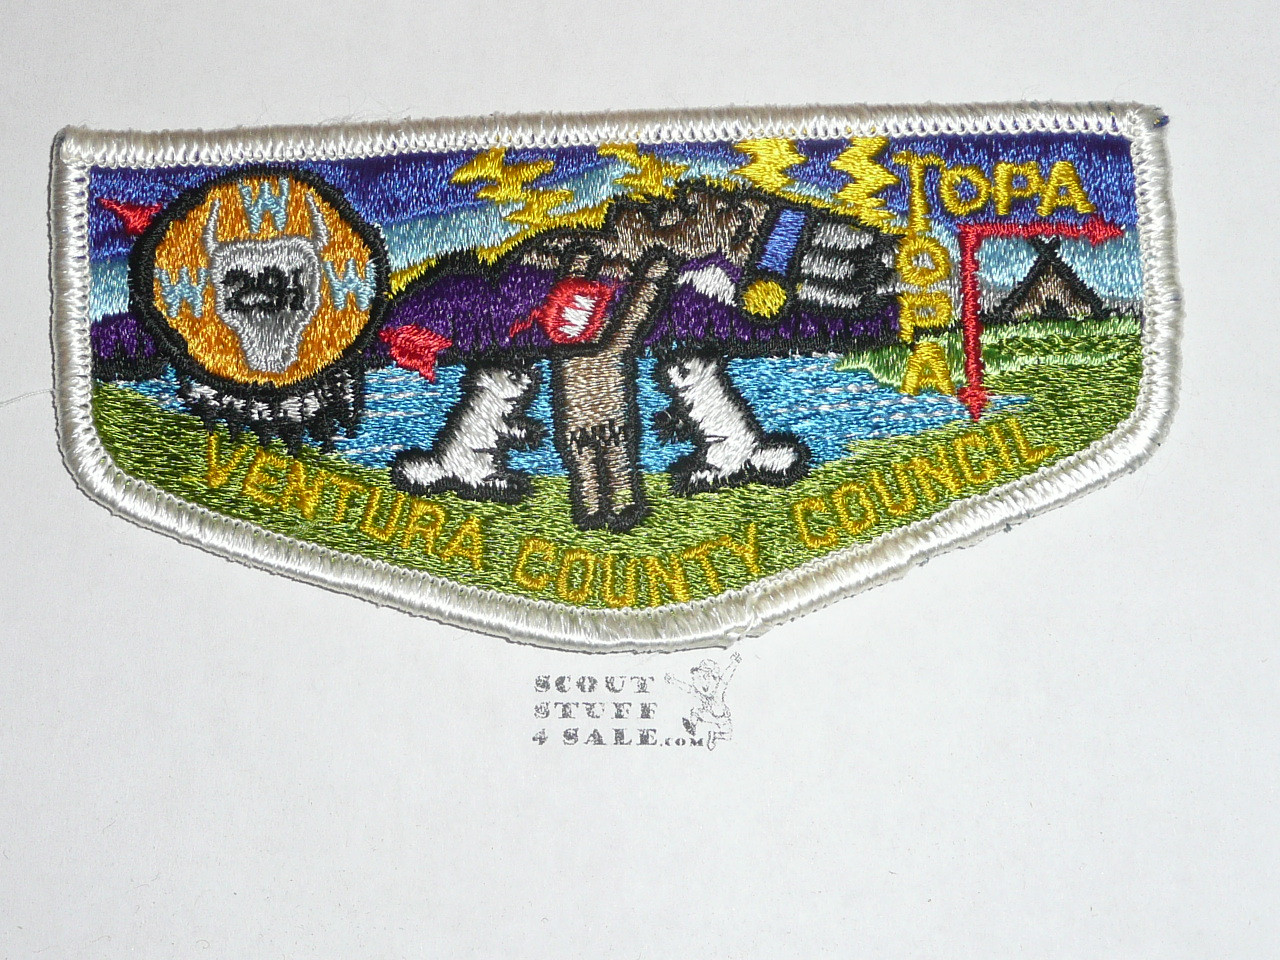 Order of the Arrow Lodge #291 Topa Topa s2 Flap Patch